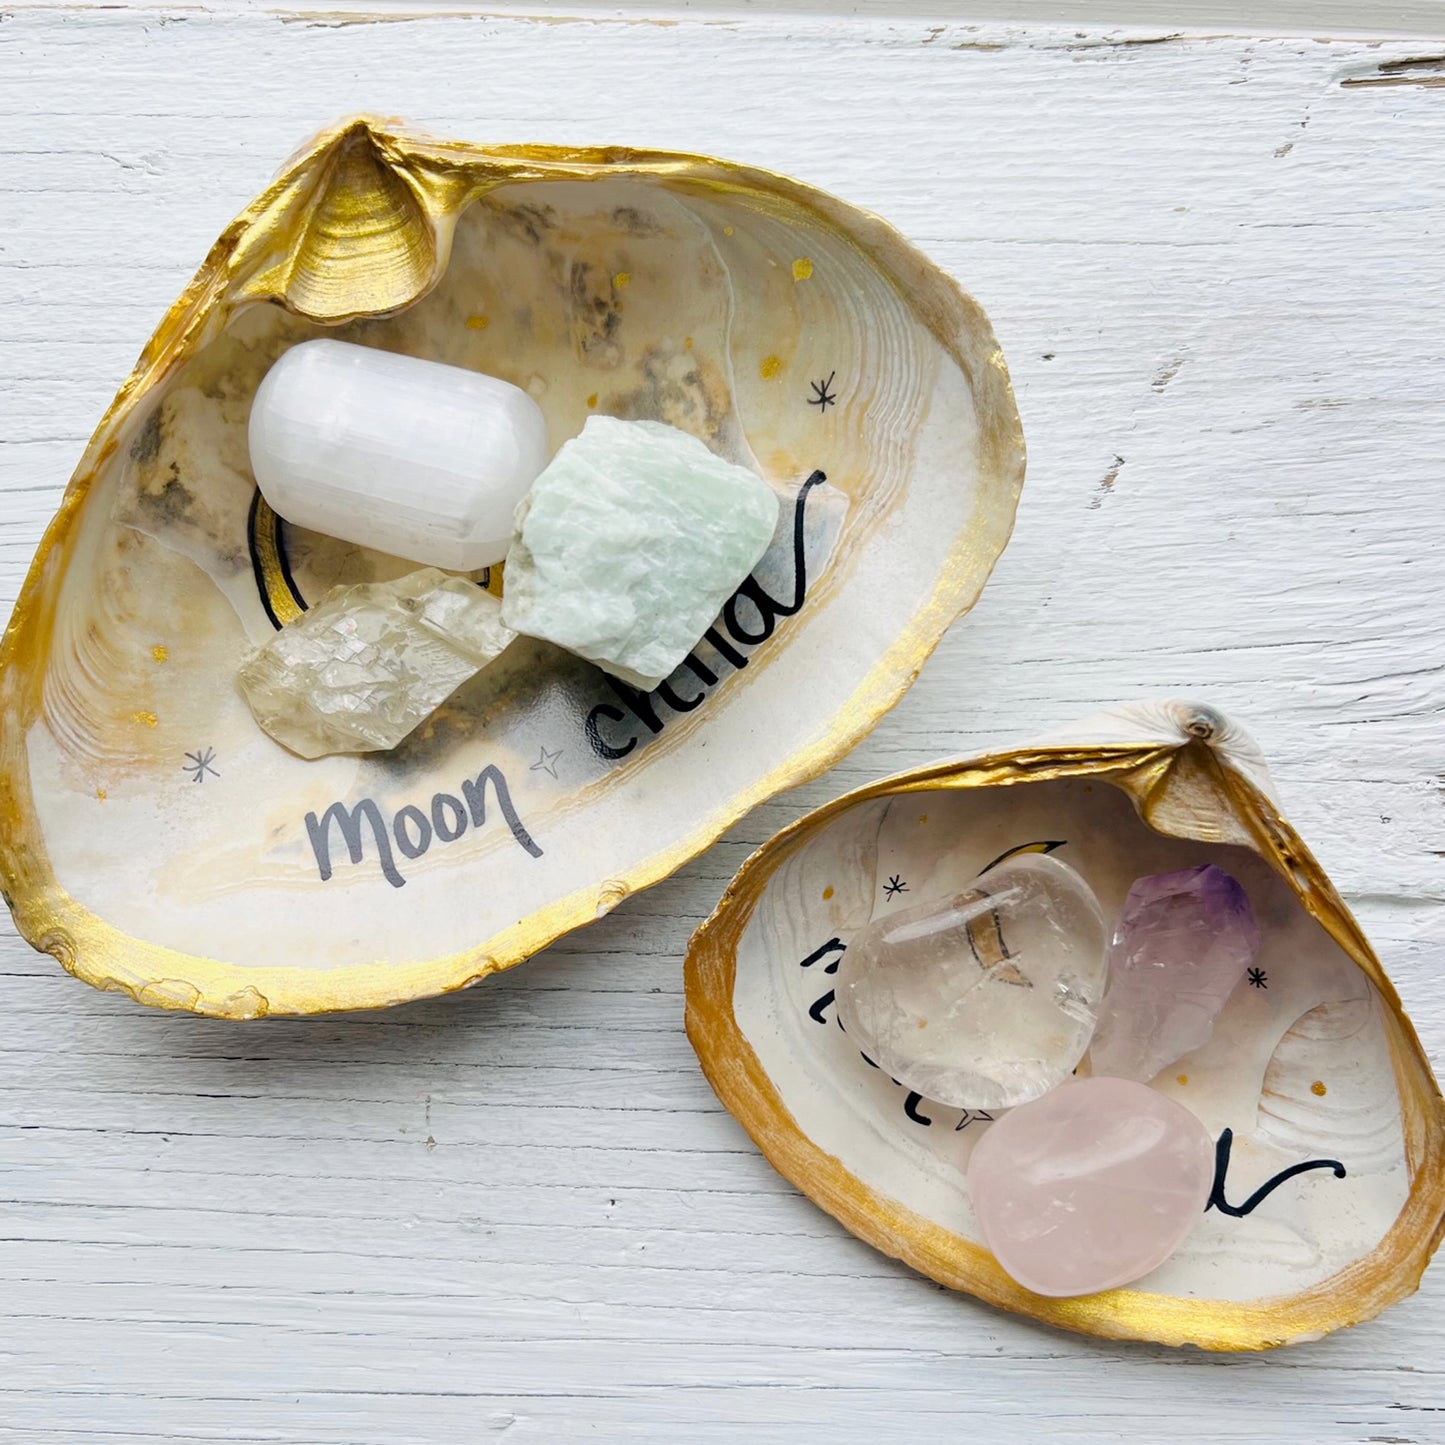 Crystal Clams by Sook & Hook | A Home for your Crystal Collection